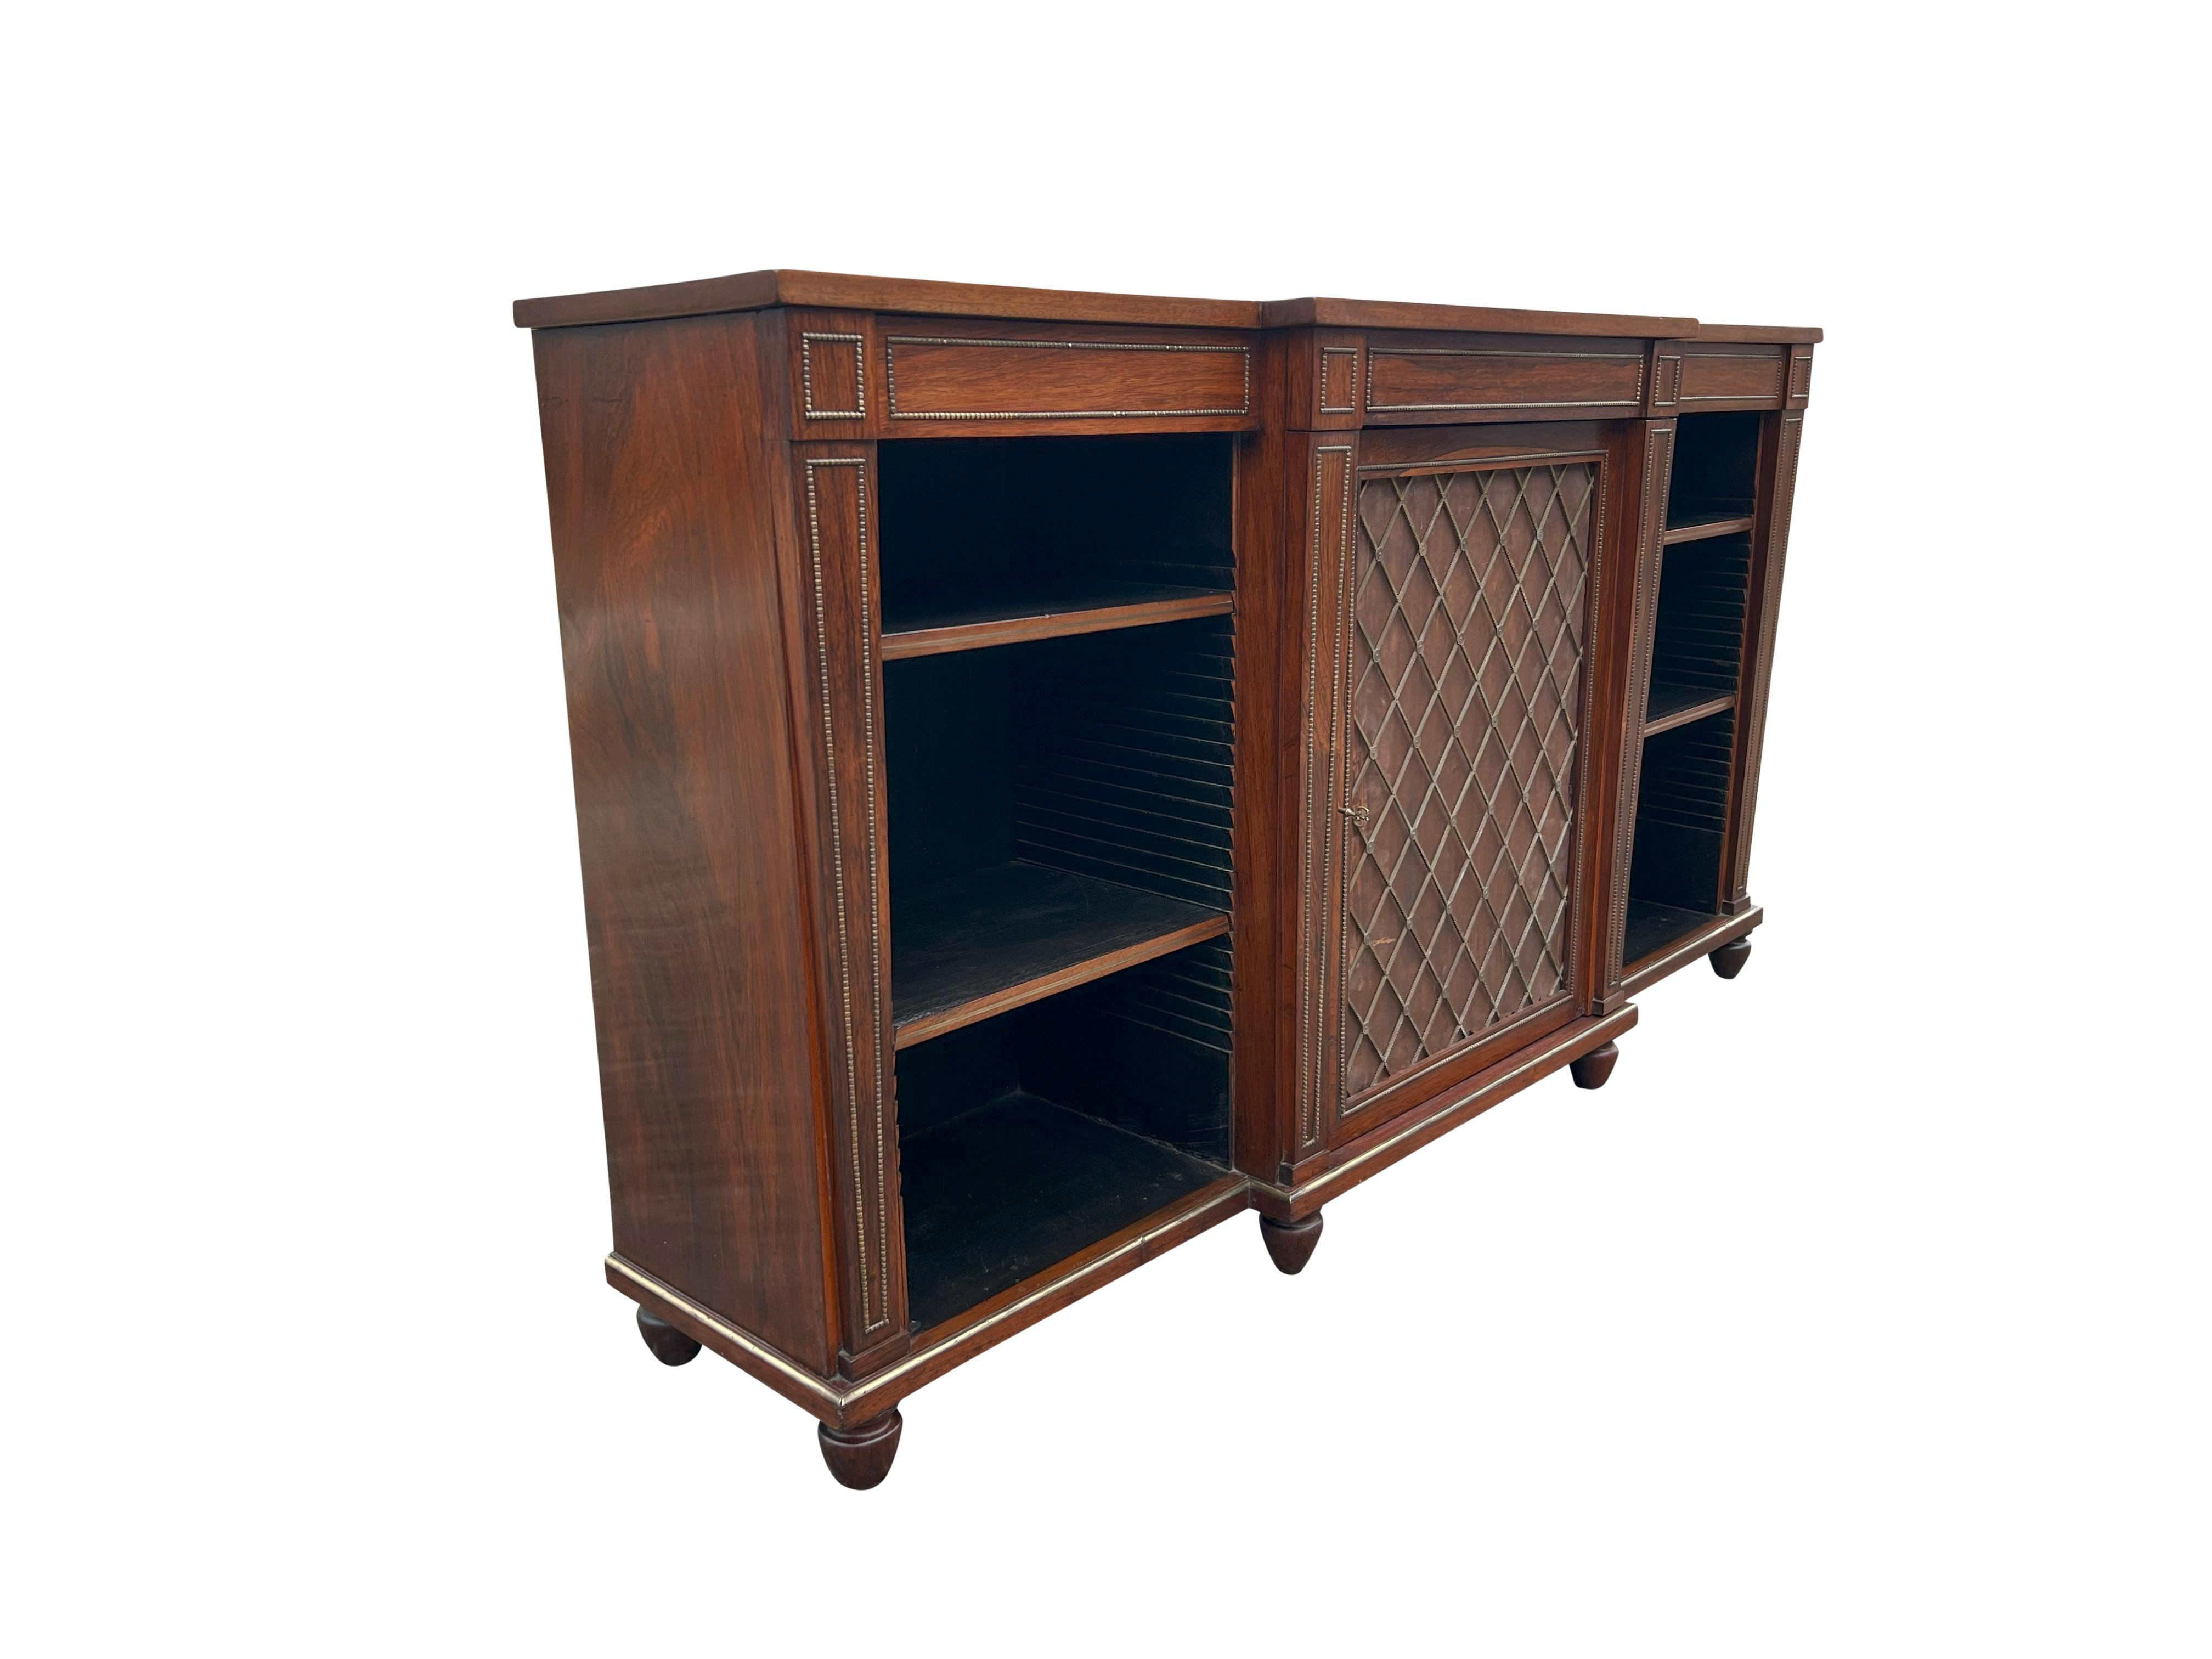 With a rectangular breakfront form top over a central door with brass grillwork. The silk under brass needs replacement or can be removed and just have open brass work. Flanked by two open cases with two shelves for each. All surrounded by brass